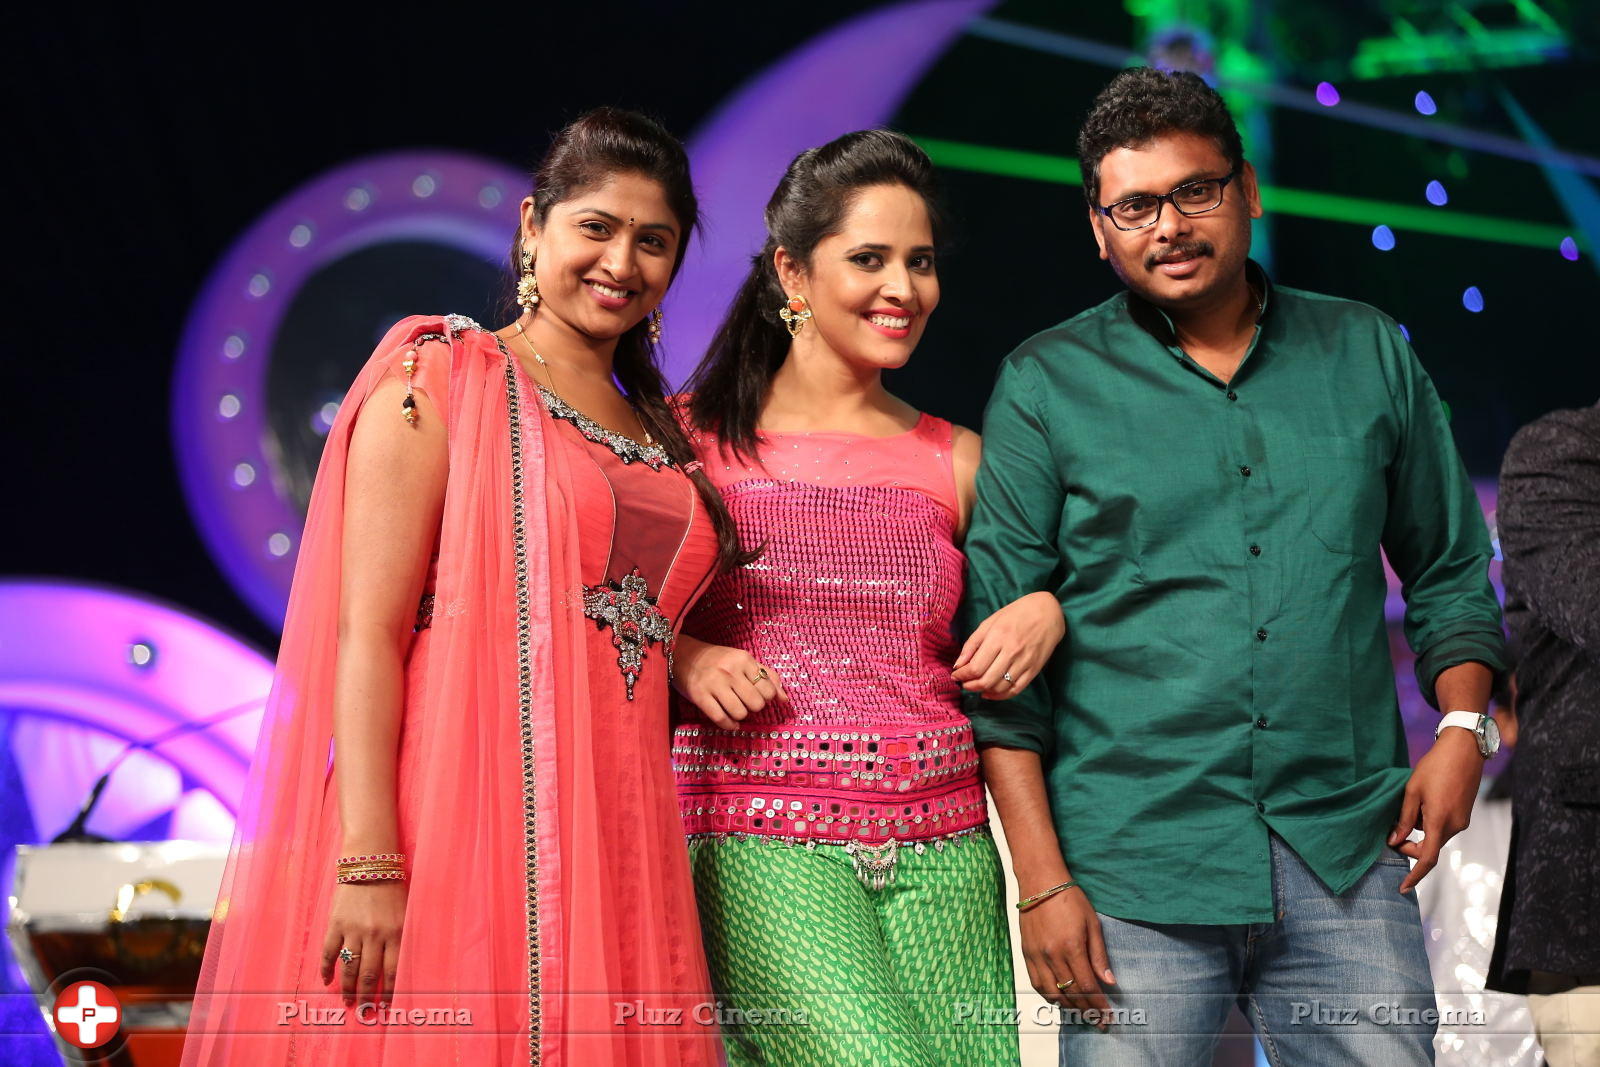 Gama Tollywood Music Awards 2014 Photos | Picture 957597